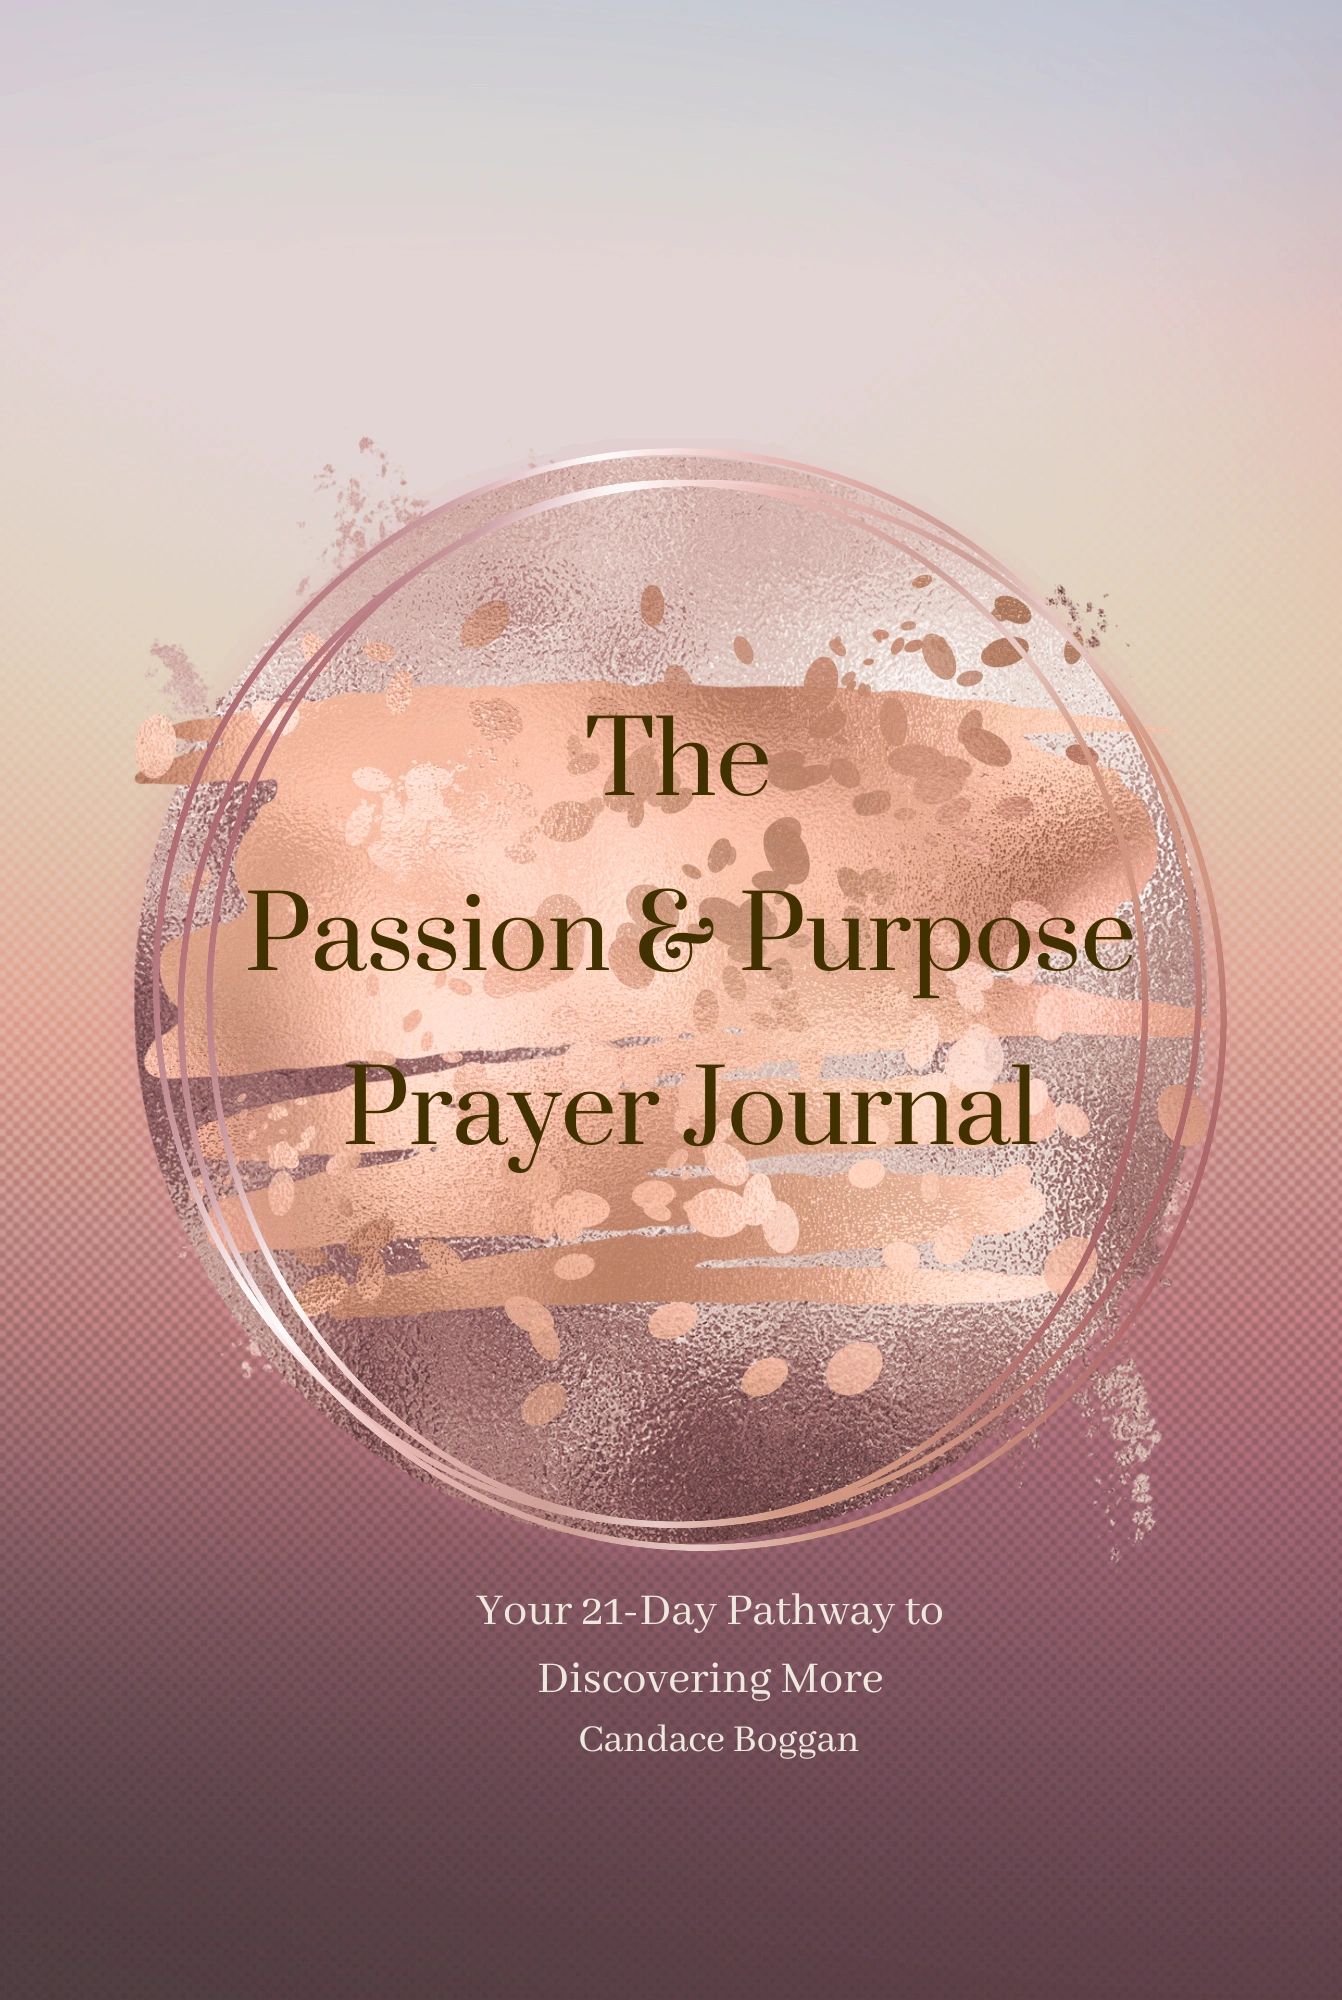 The second installment in the Write the Vision series: The Passion & Purpose Prayer Journal!